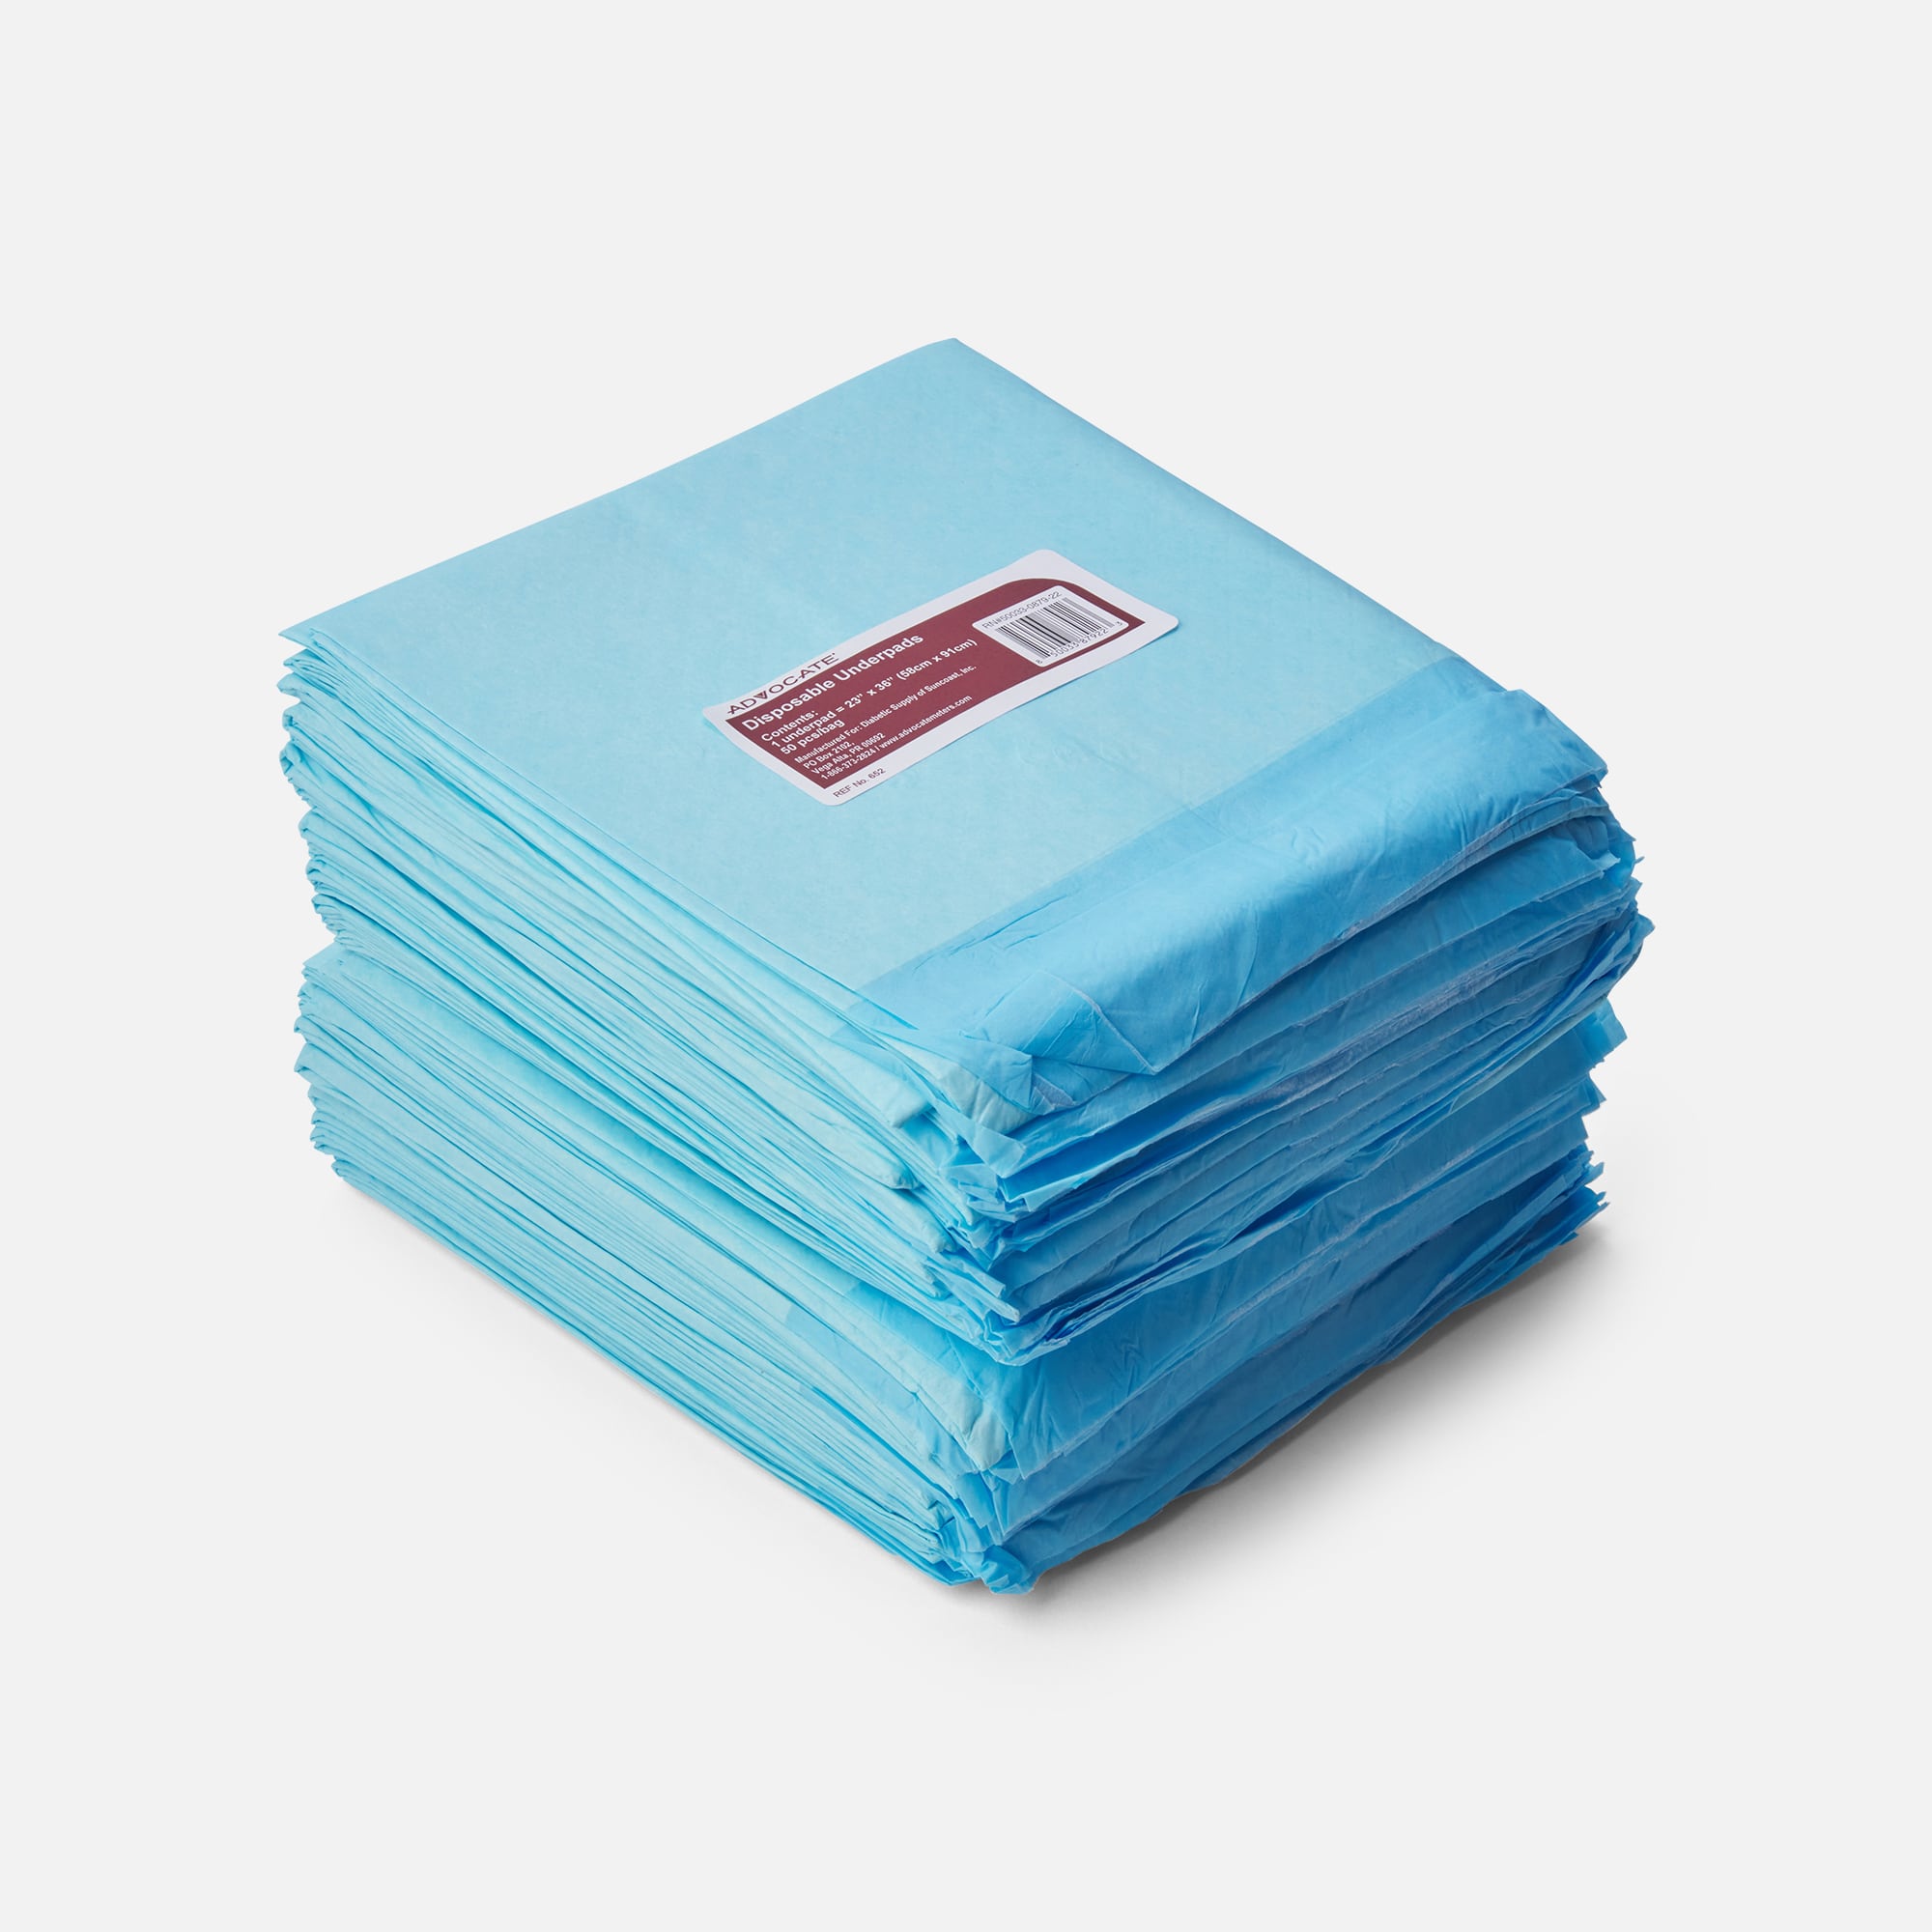 HSA Eligible | Advocate Disposable Underpads (45 Grams/High Absorbency), 50  ct.